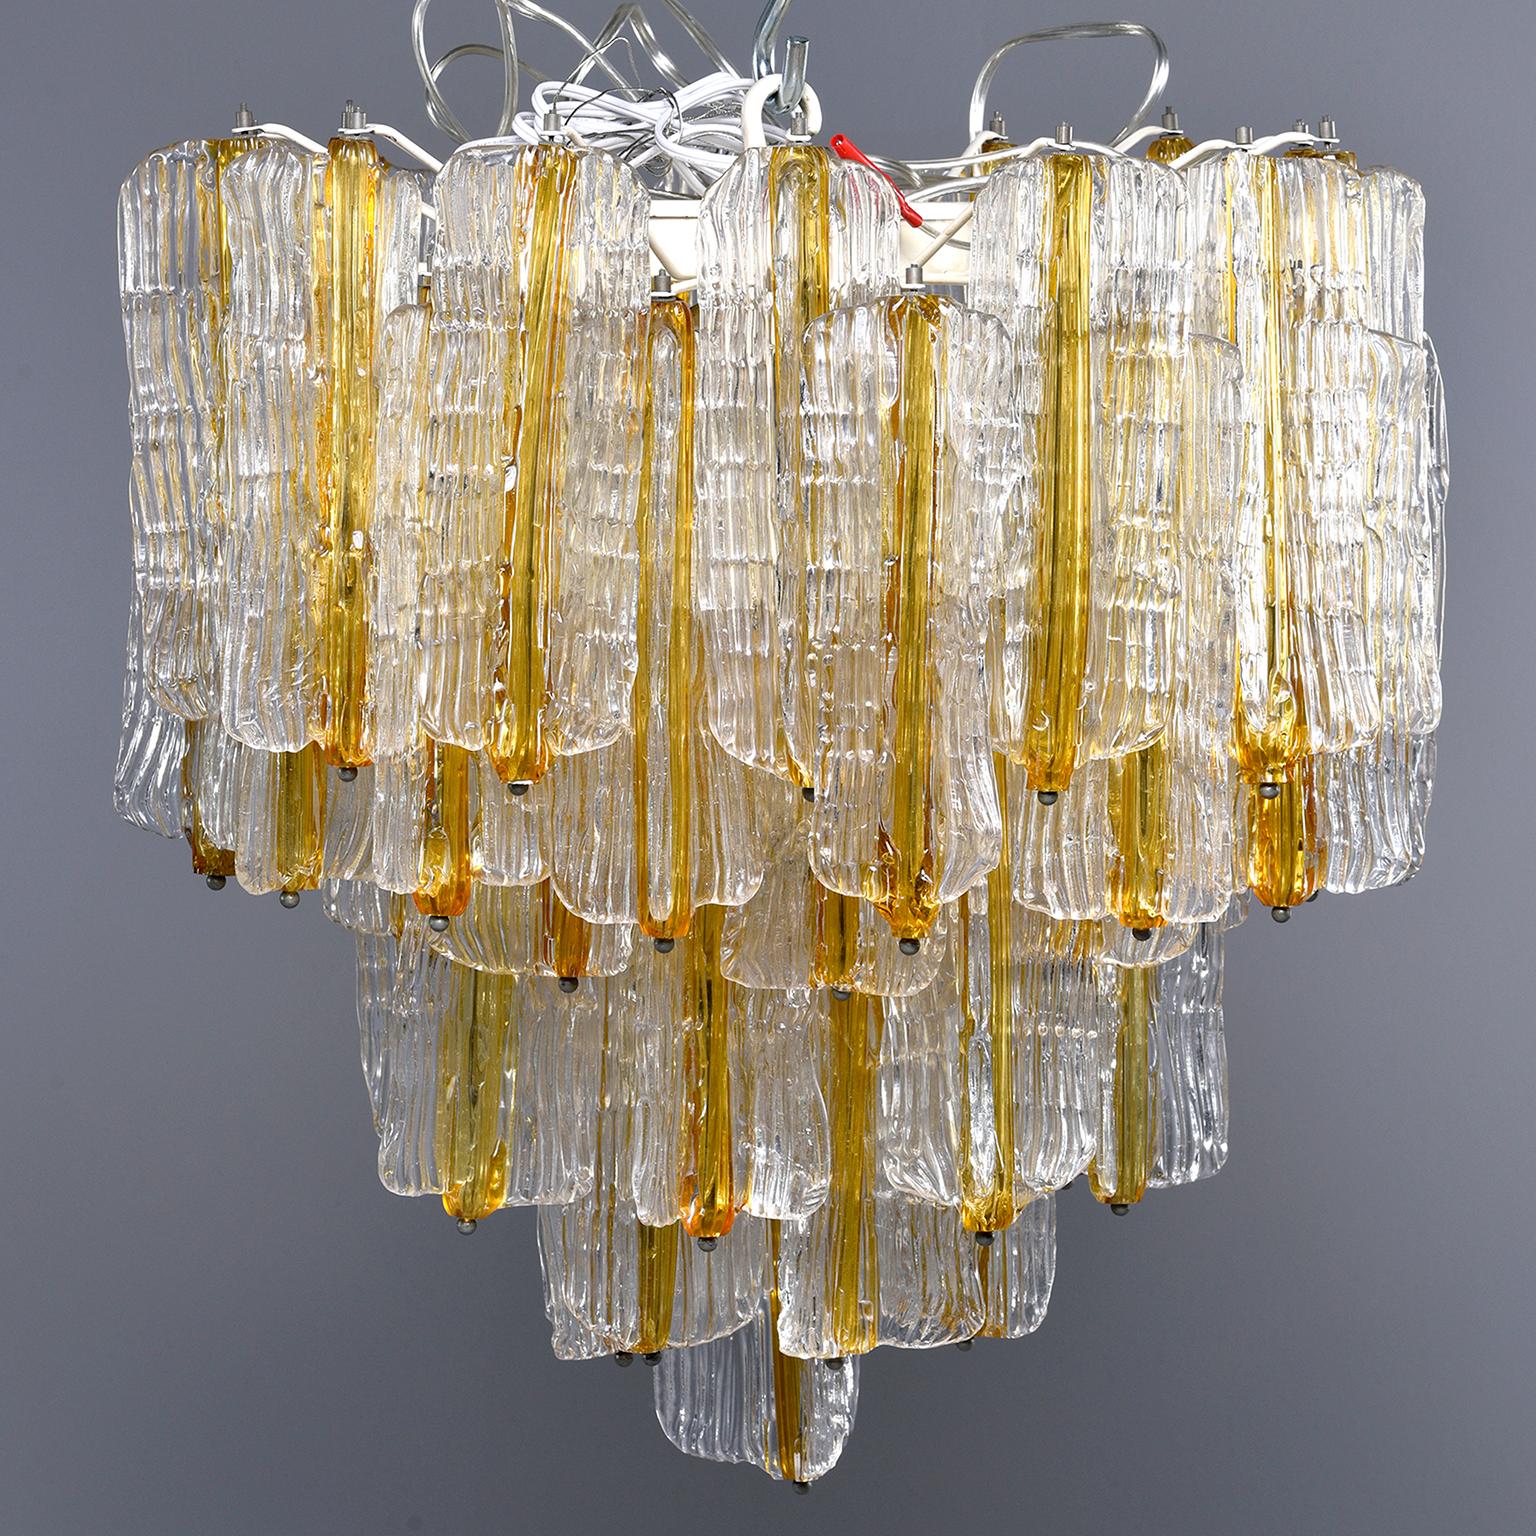 Venini chandelier designed by Toni Zuccheri for Venini features tiers of ribbed clear glass pendants with amber centers. Six regular sized sockets. Chandelier has been rewired for US electrical standards, circa late 1960s-early 1970s.